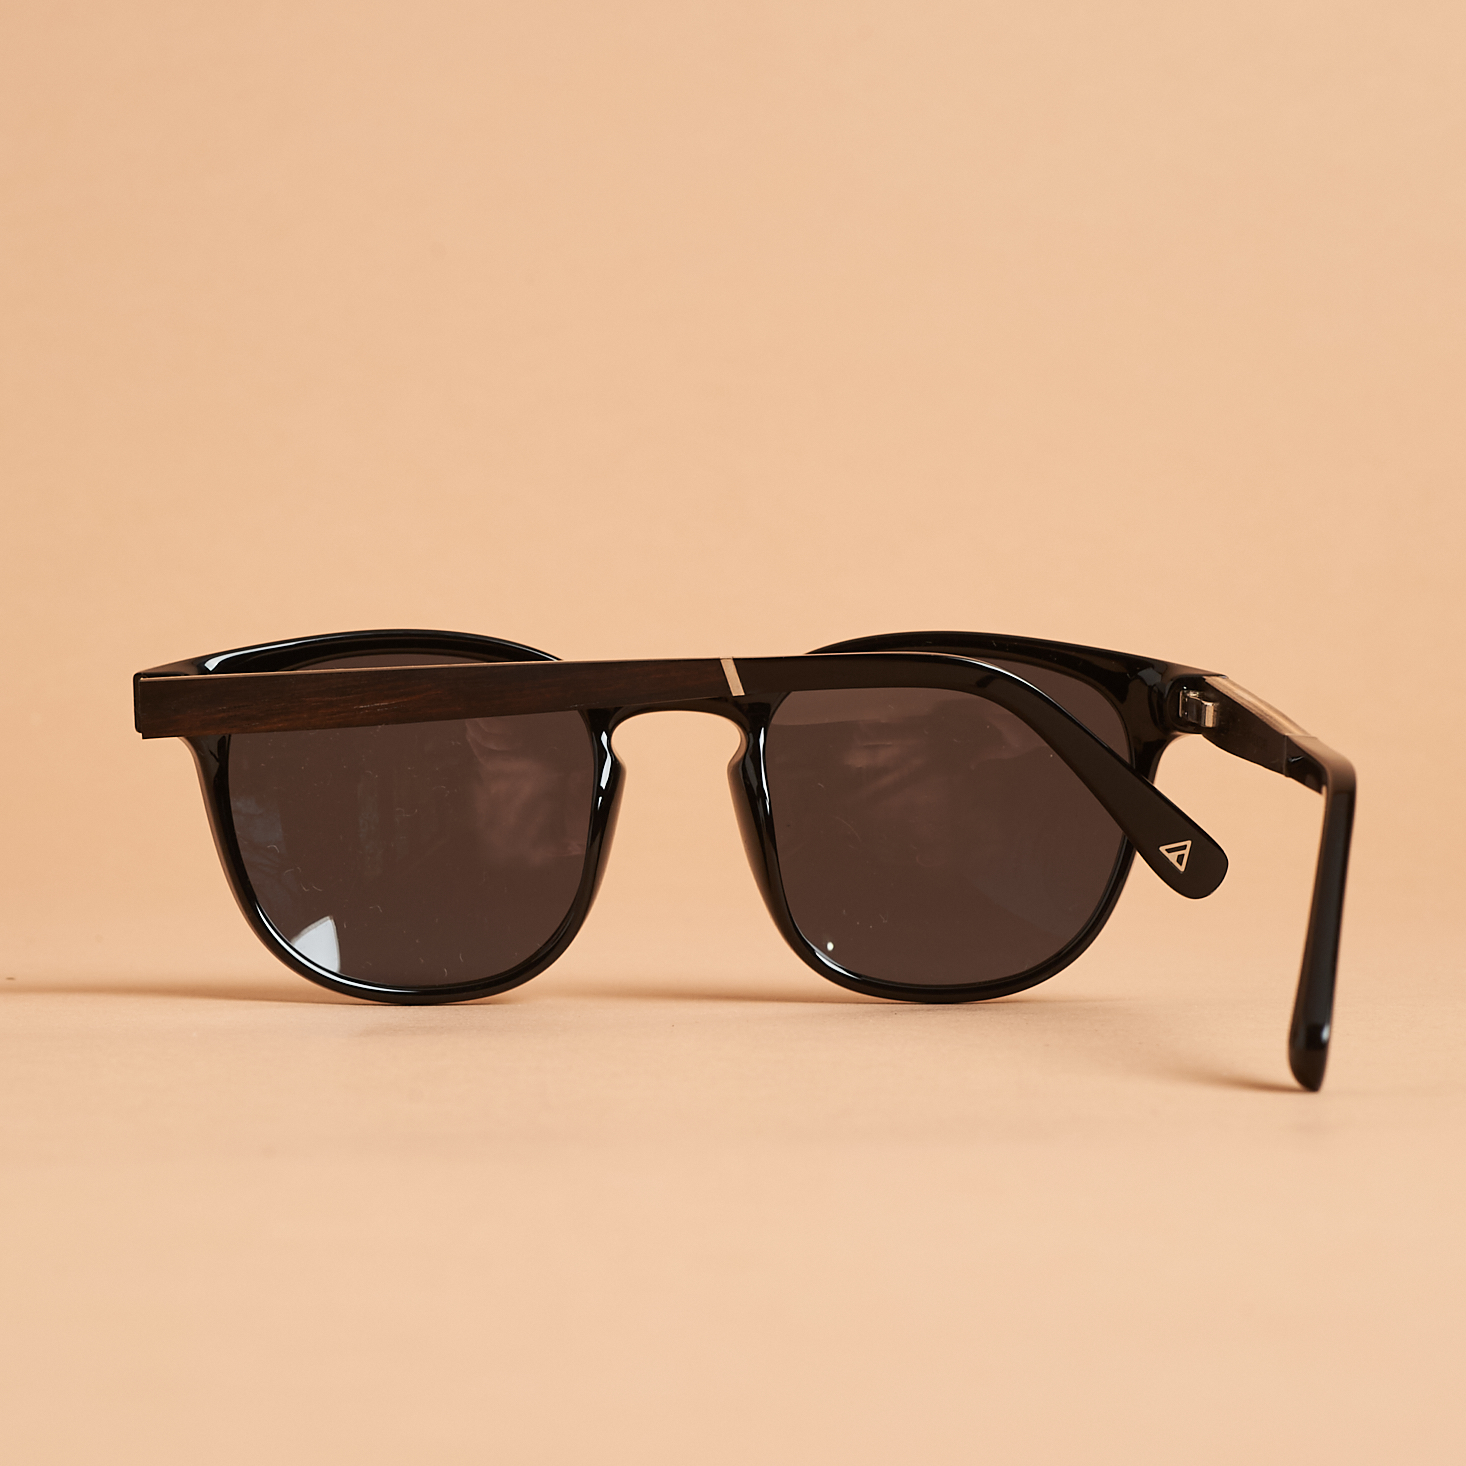 Schwood sunglasses from Cairn subscription